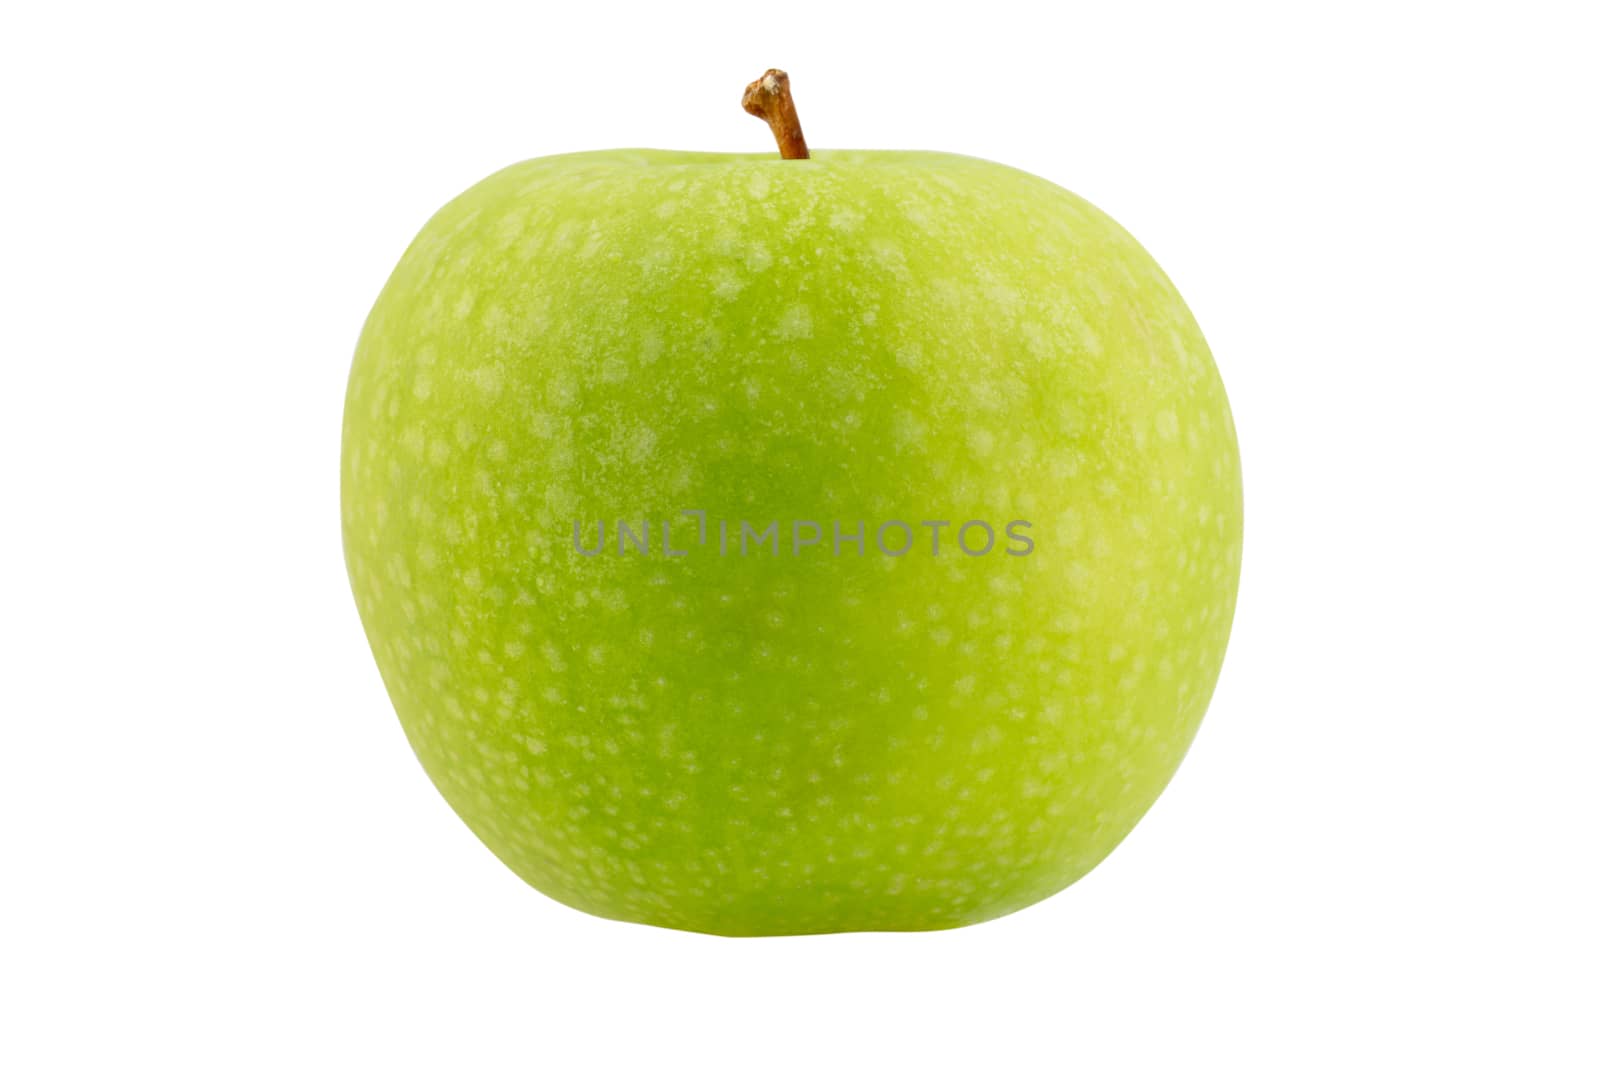 Green apple on white background by vitawin